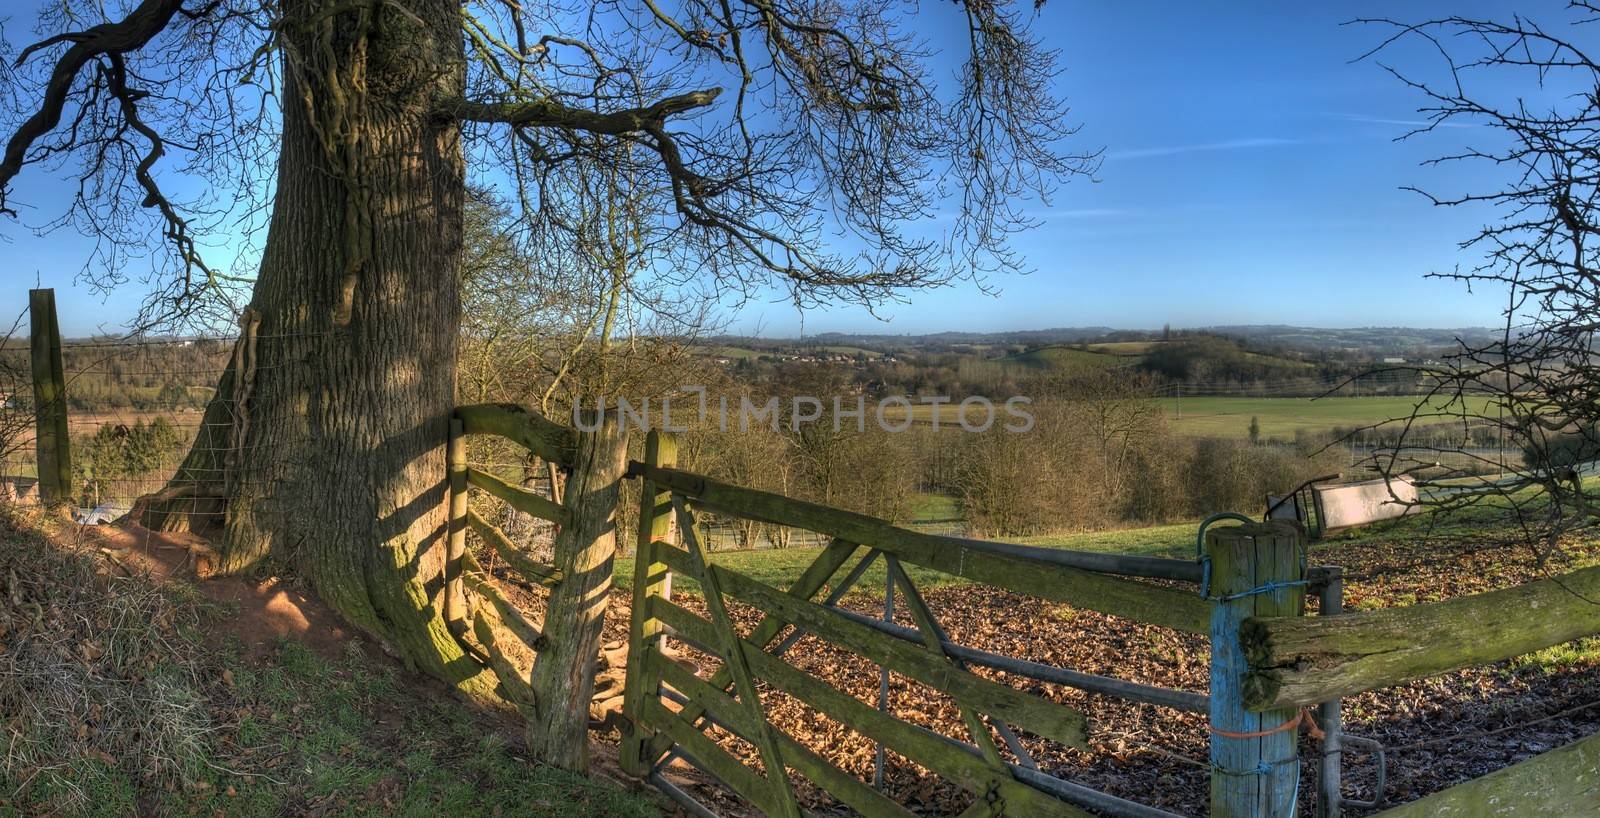 Old gate an oak tree overlooking Worcestershire, England.